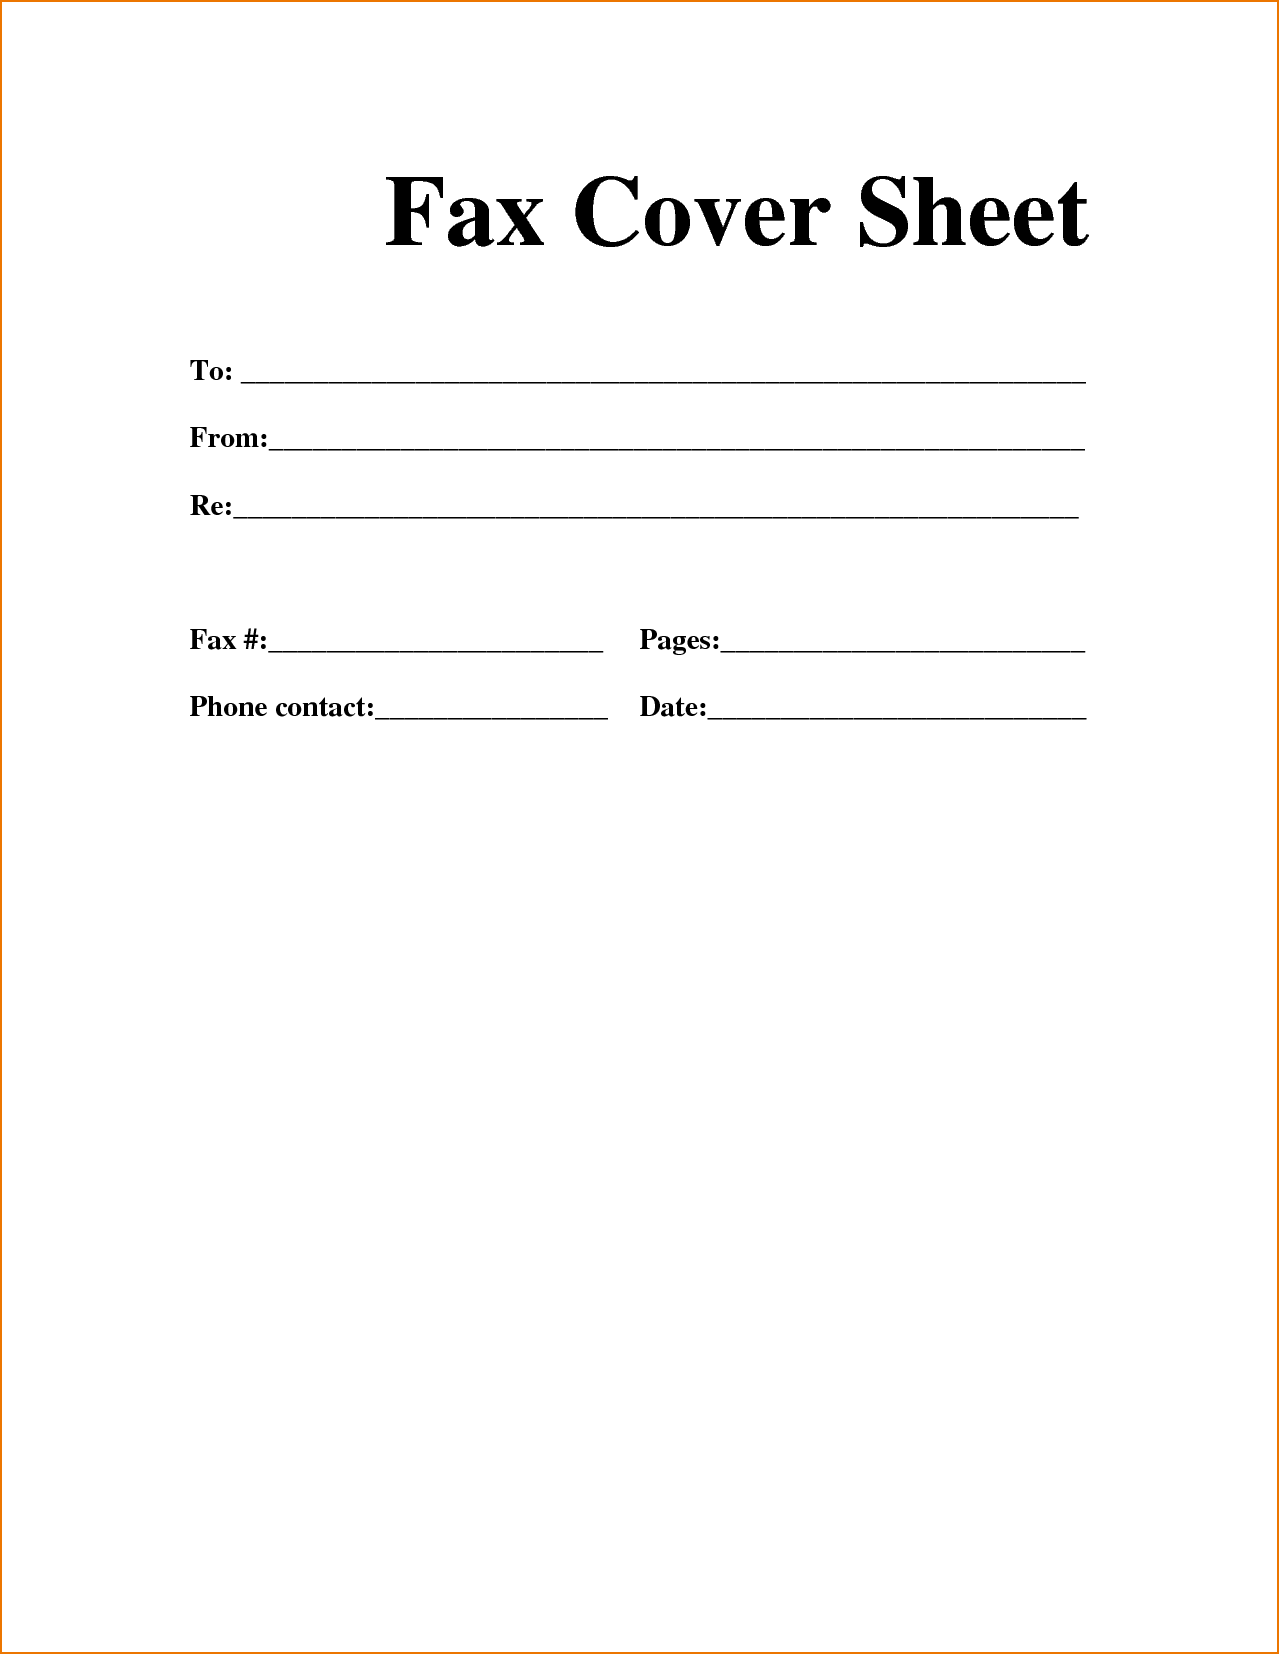 Free Fax Cover Sheet Templates    Office Fax or VirtualPBX Email 